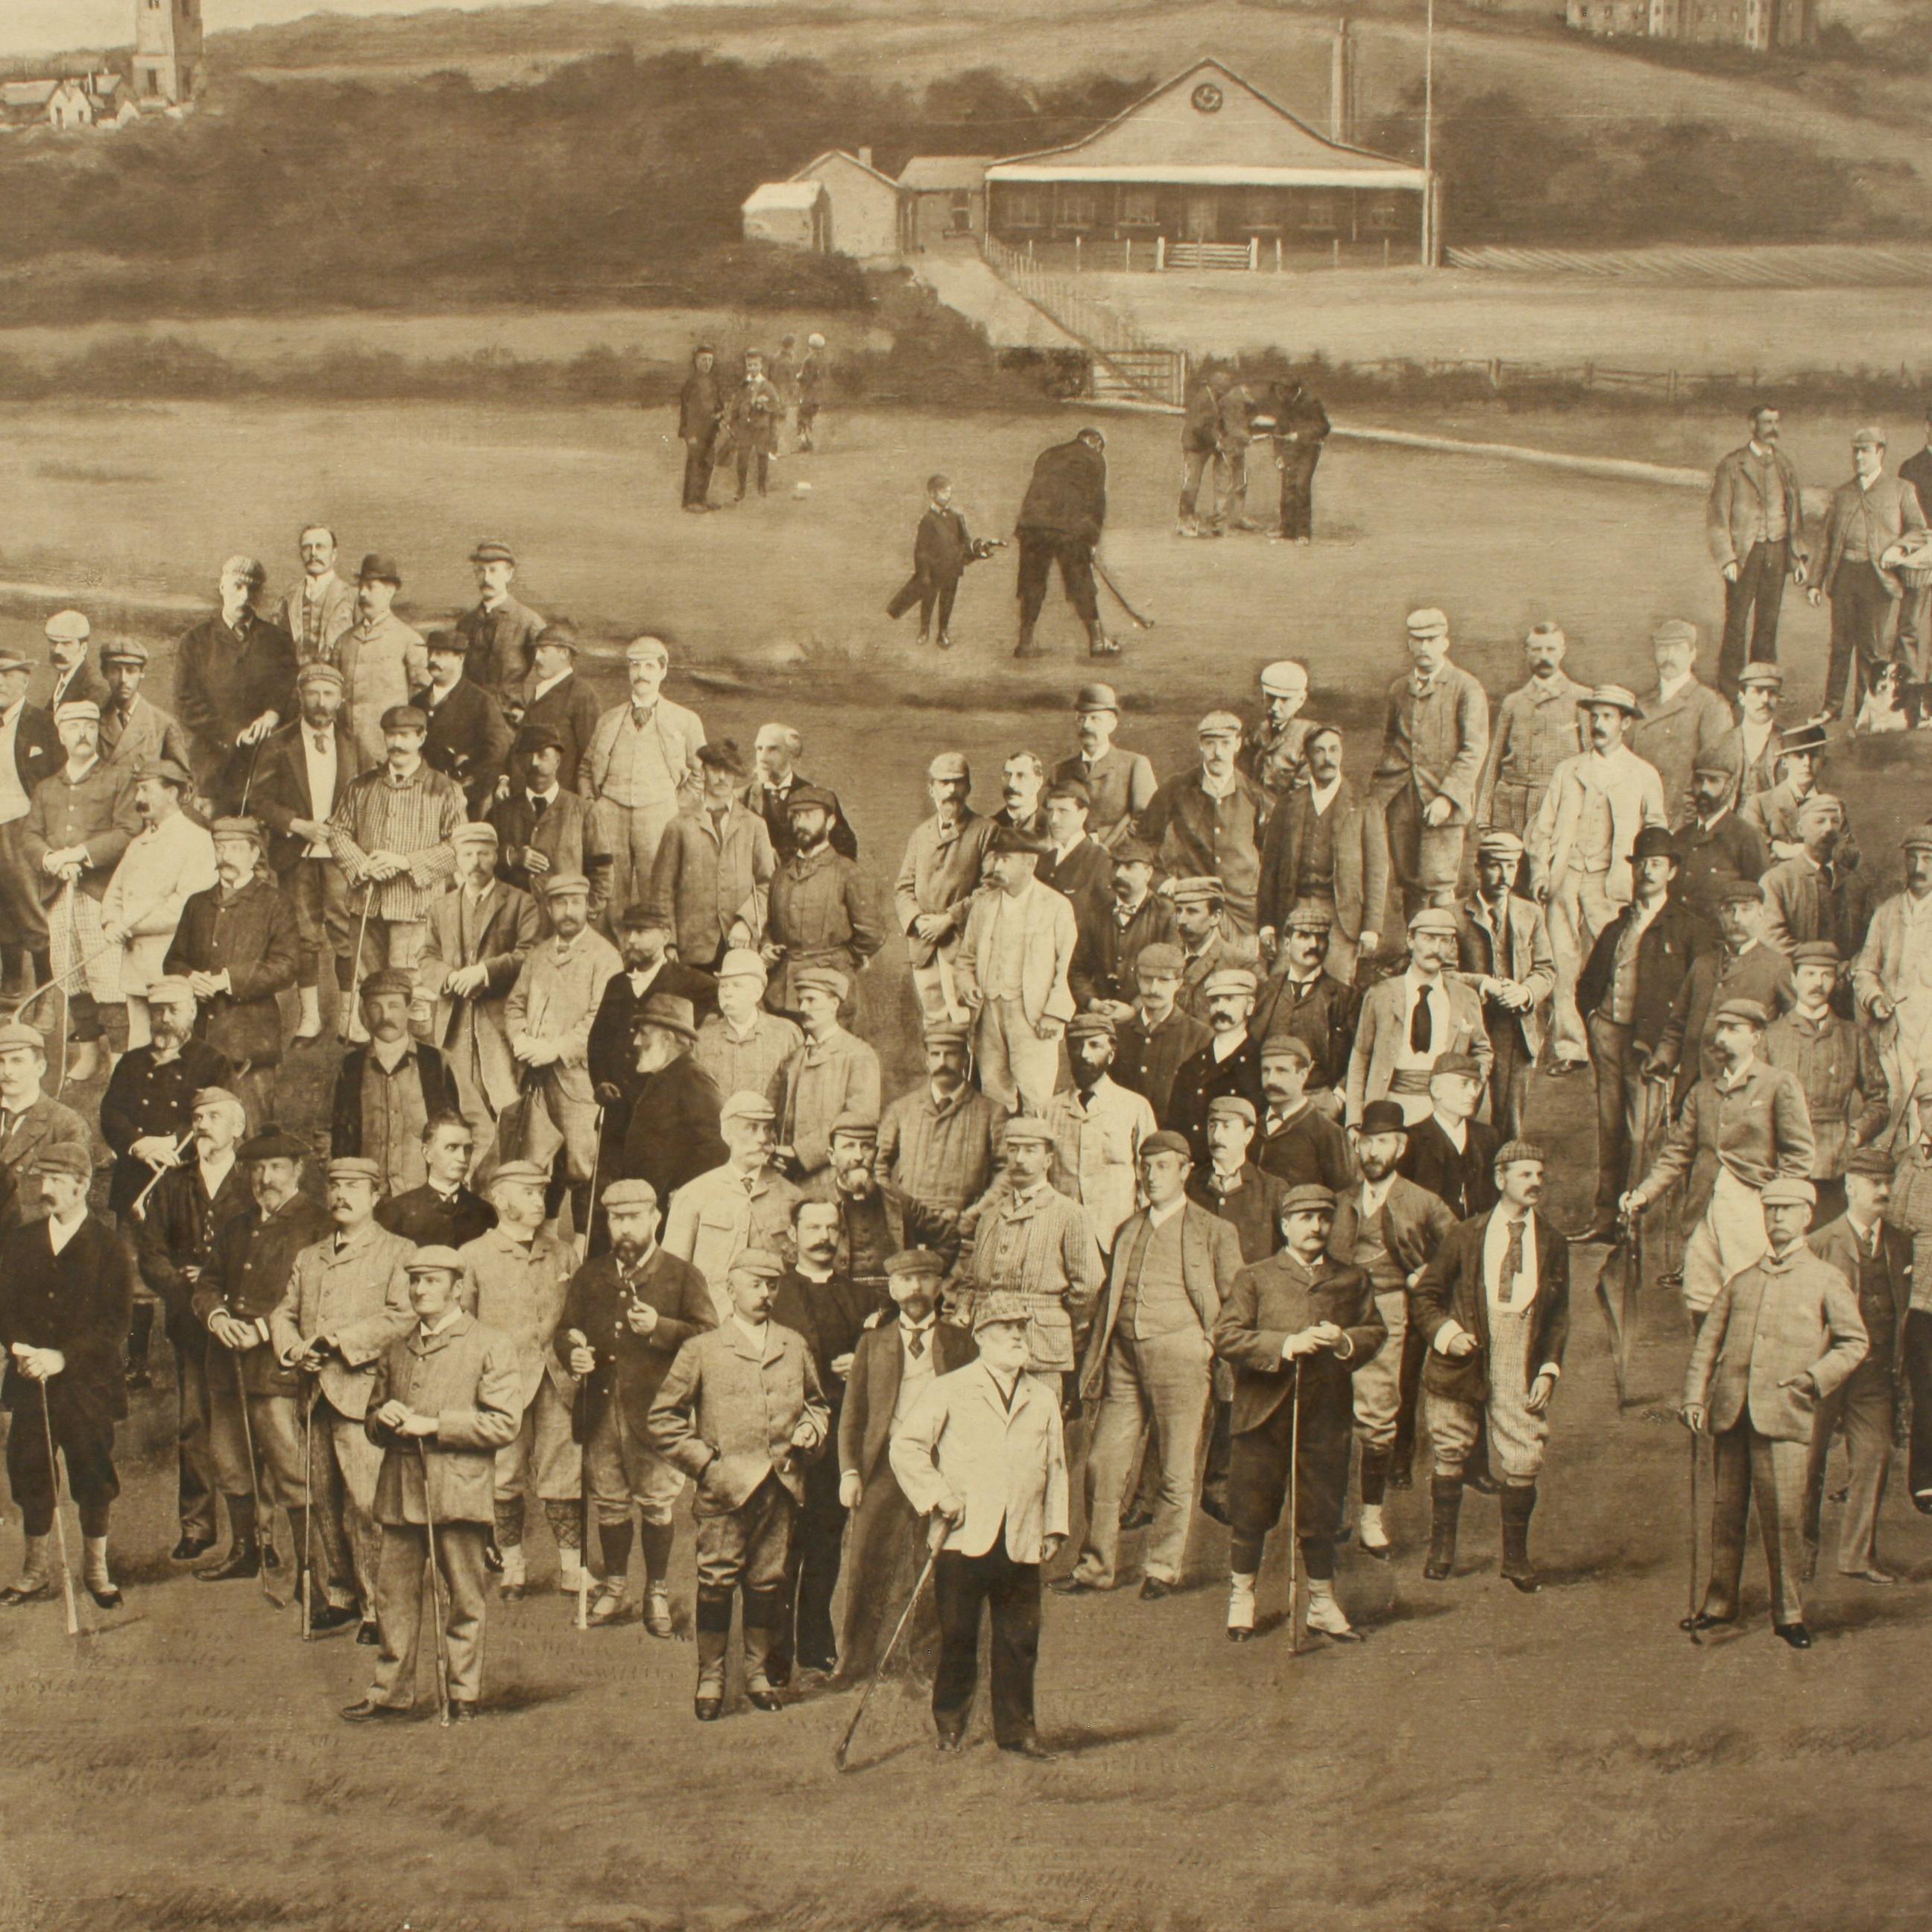 Royal North Devon Golf Club 1893 by Mayall & Co. Ltd.
A great image of the members of the 'Royal North Devon Golf Club, Westward Ho!' from 1893. The figures are all photographs superimposed onto a painted background of the course. In the margin is